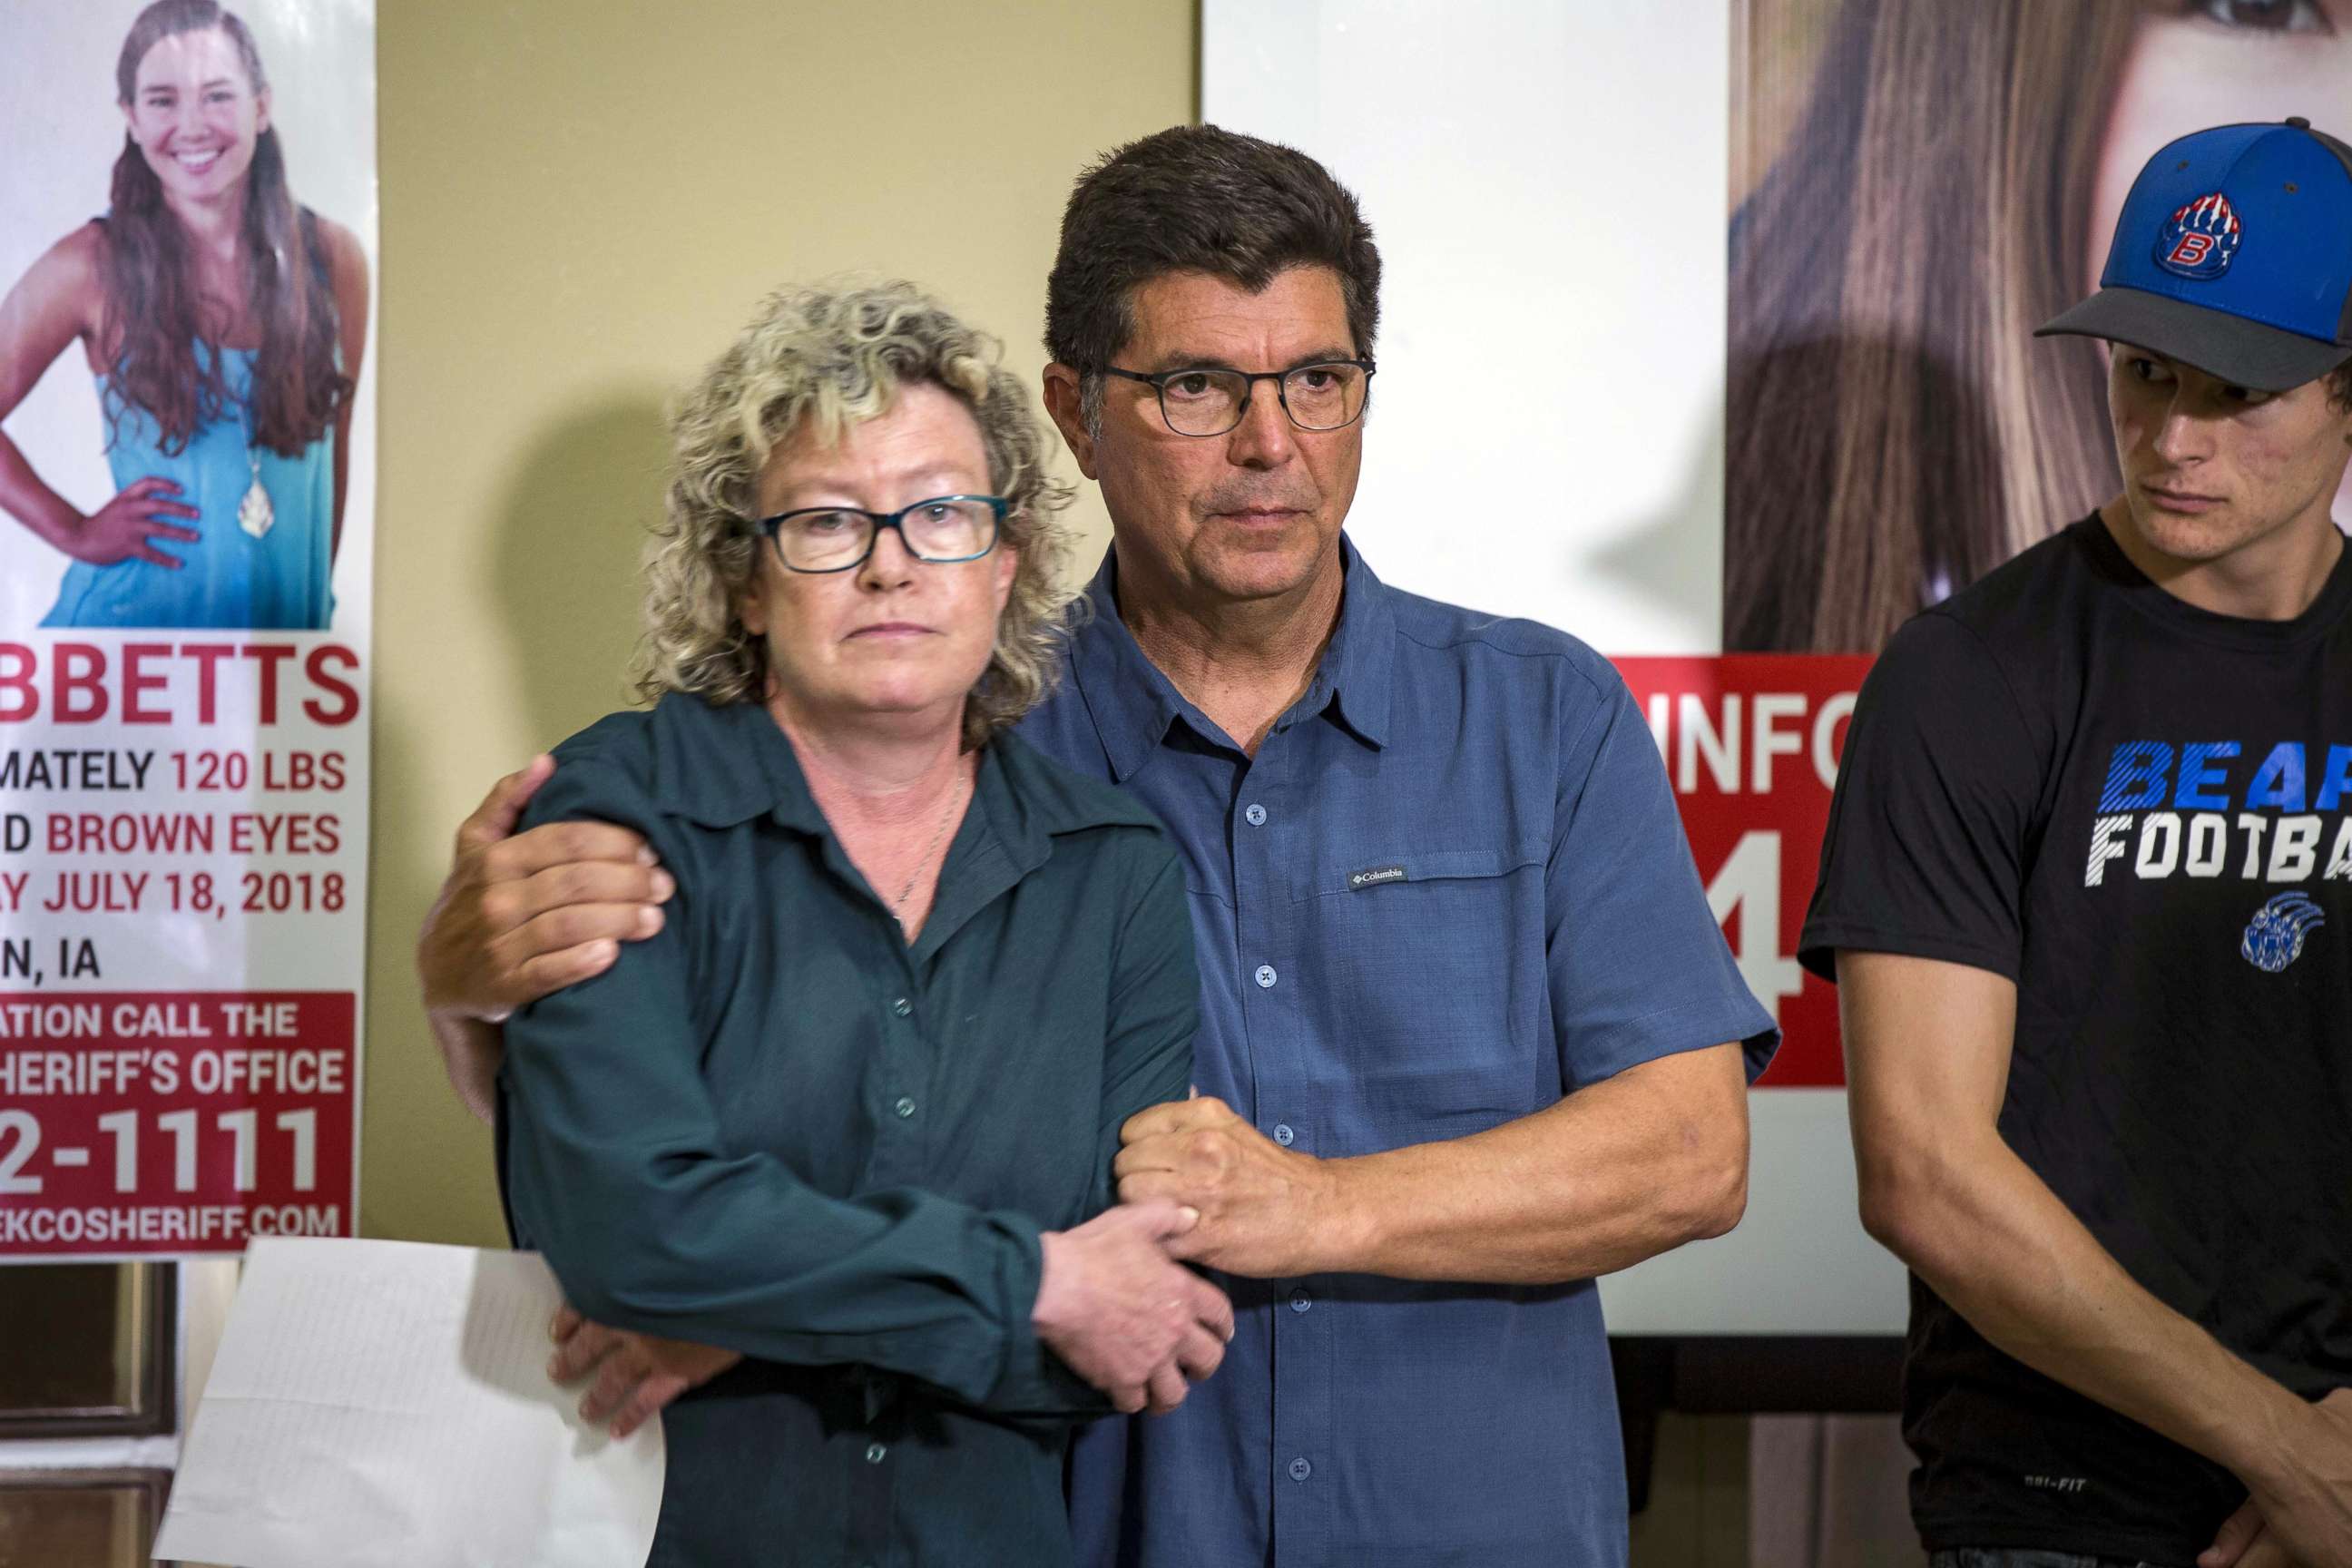 PHOTO: Laura Calderwood and Rob Tibbetts, the parents of missing of Iowa student Mollie Tibbetts, hold each other during a press conference for the "Bring Mollie Tibbetts Home Safe" reward fund in Brooklyn, Iowa, Aug. 2, 2018.